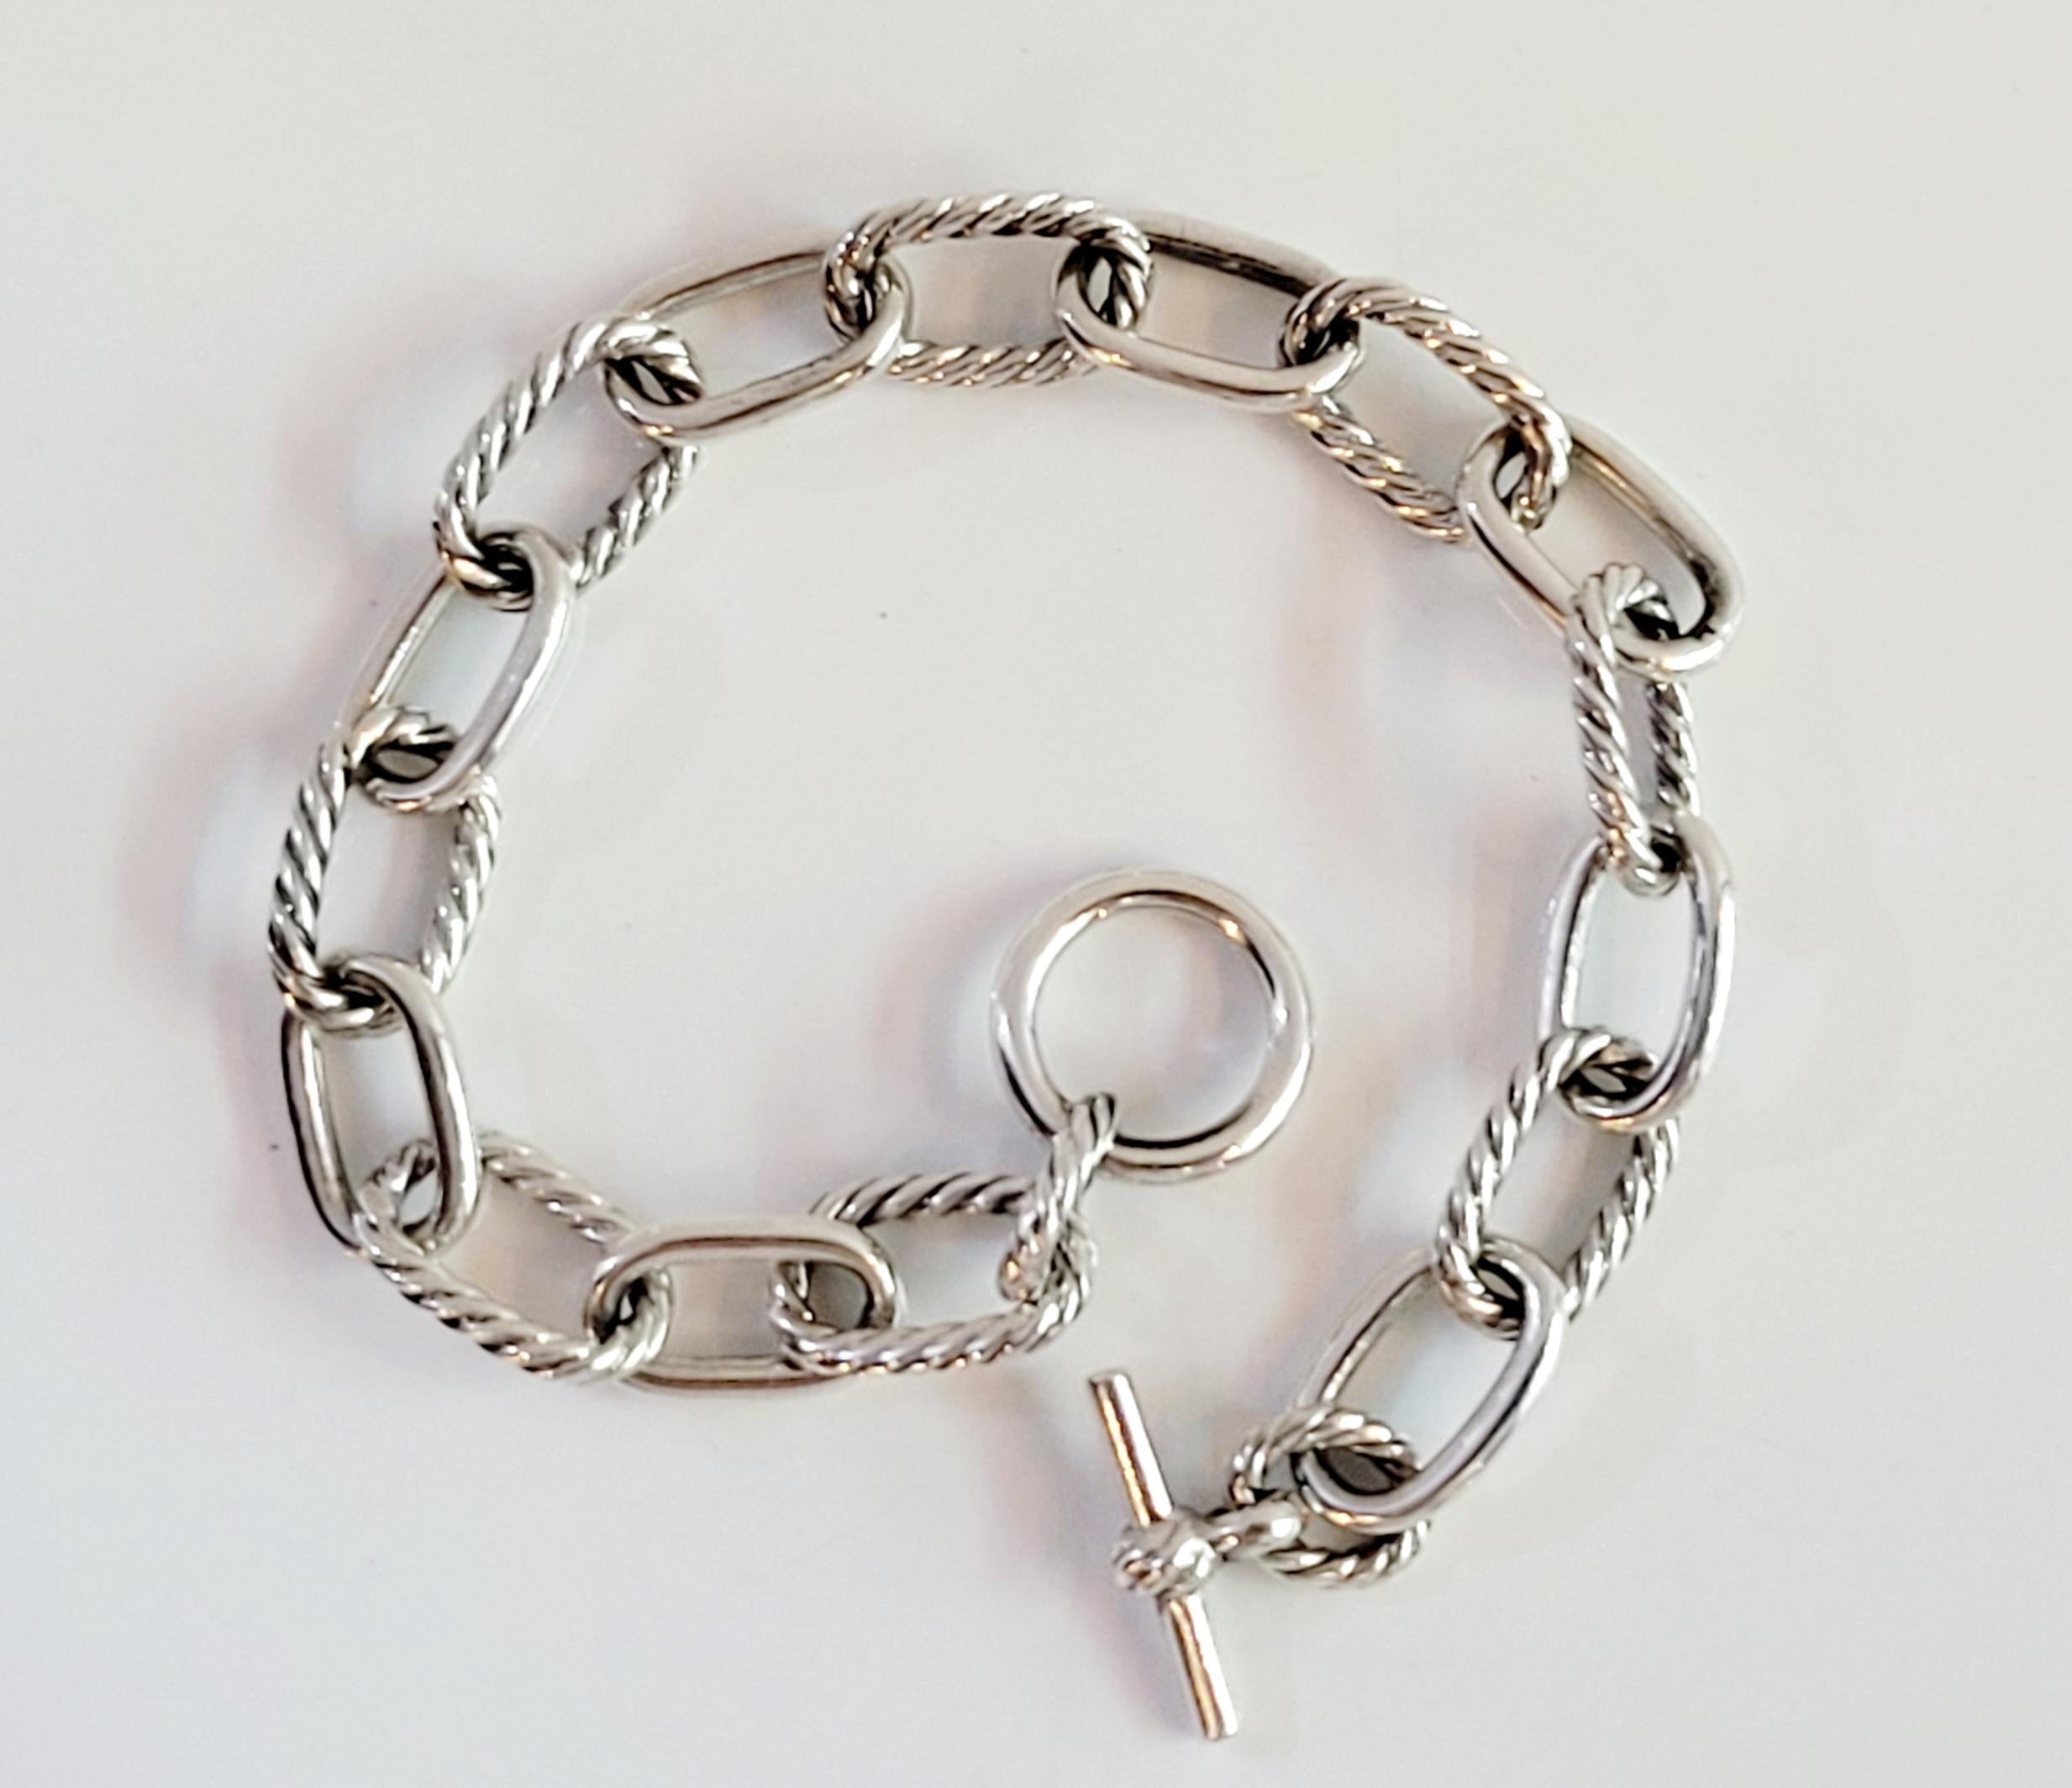 Brand David Yurman 
Sterling Silver 925
Bracelet 7.5'' Long
Toggle clasp 
Small size 
Condition New, never worn .
Comes with David Yurman pouch